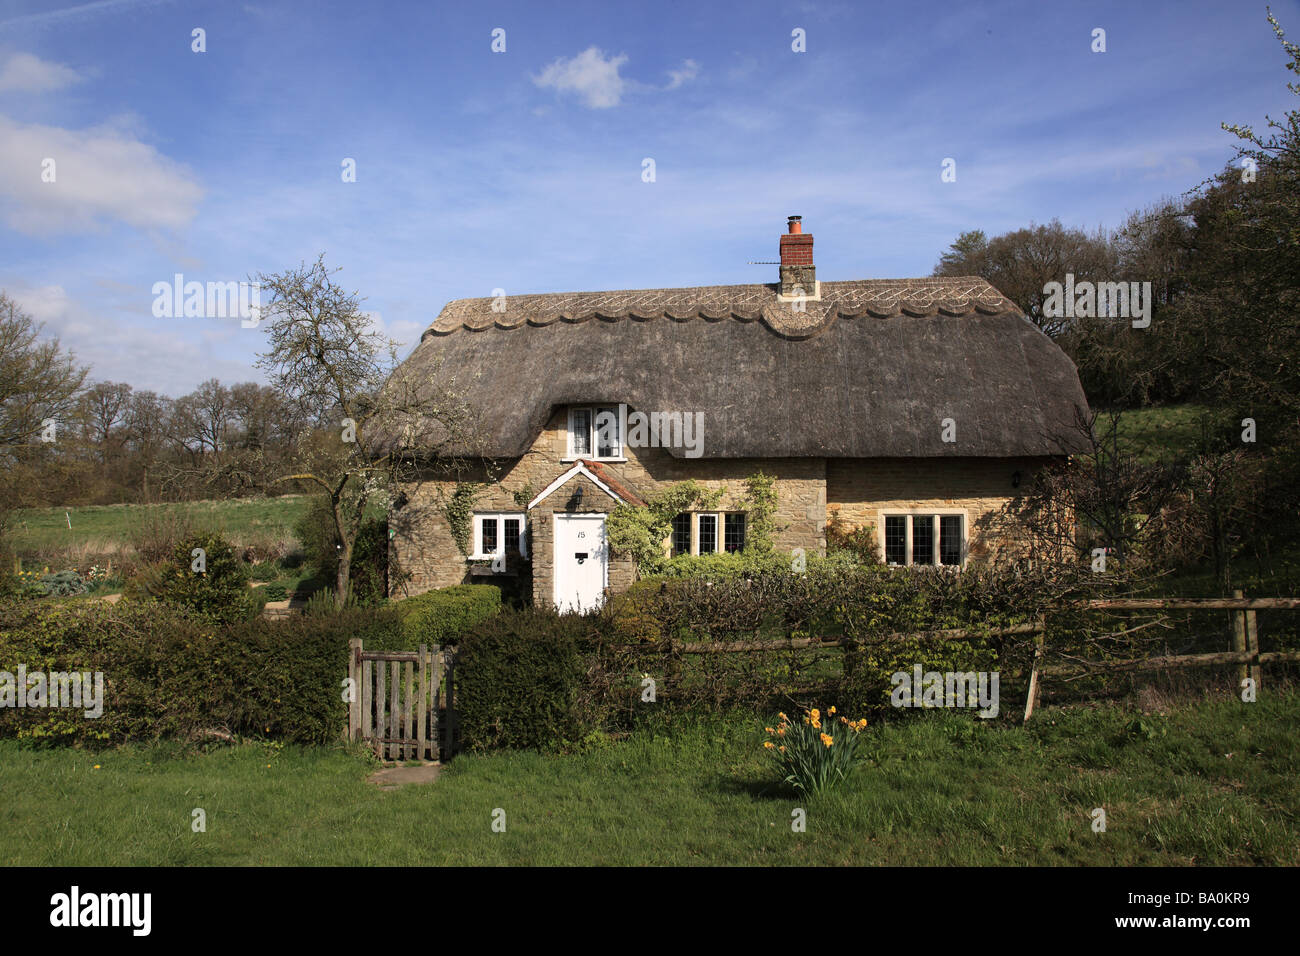 Thatched Cottage near Lacock, Wiltshire, England, UK Stock Photo